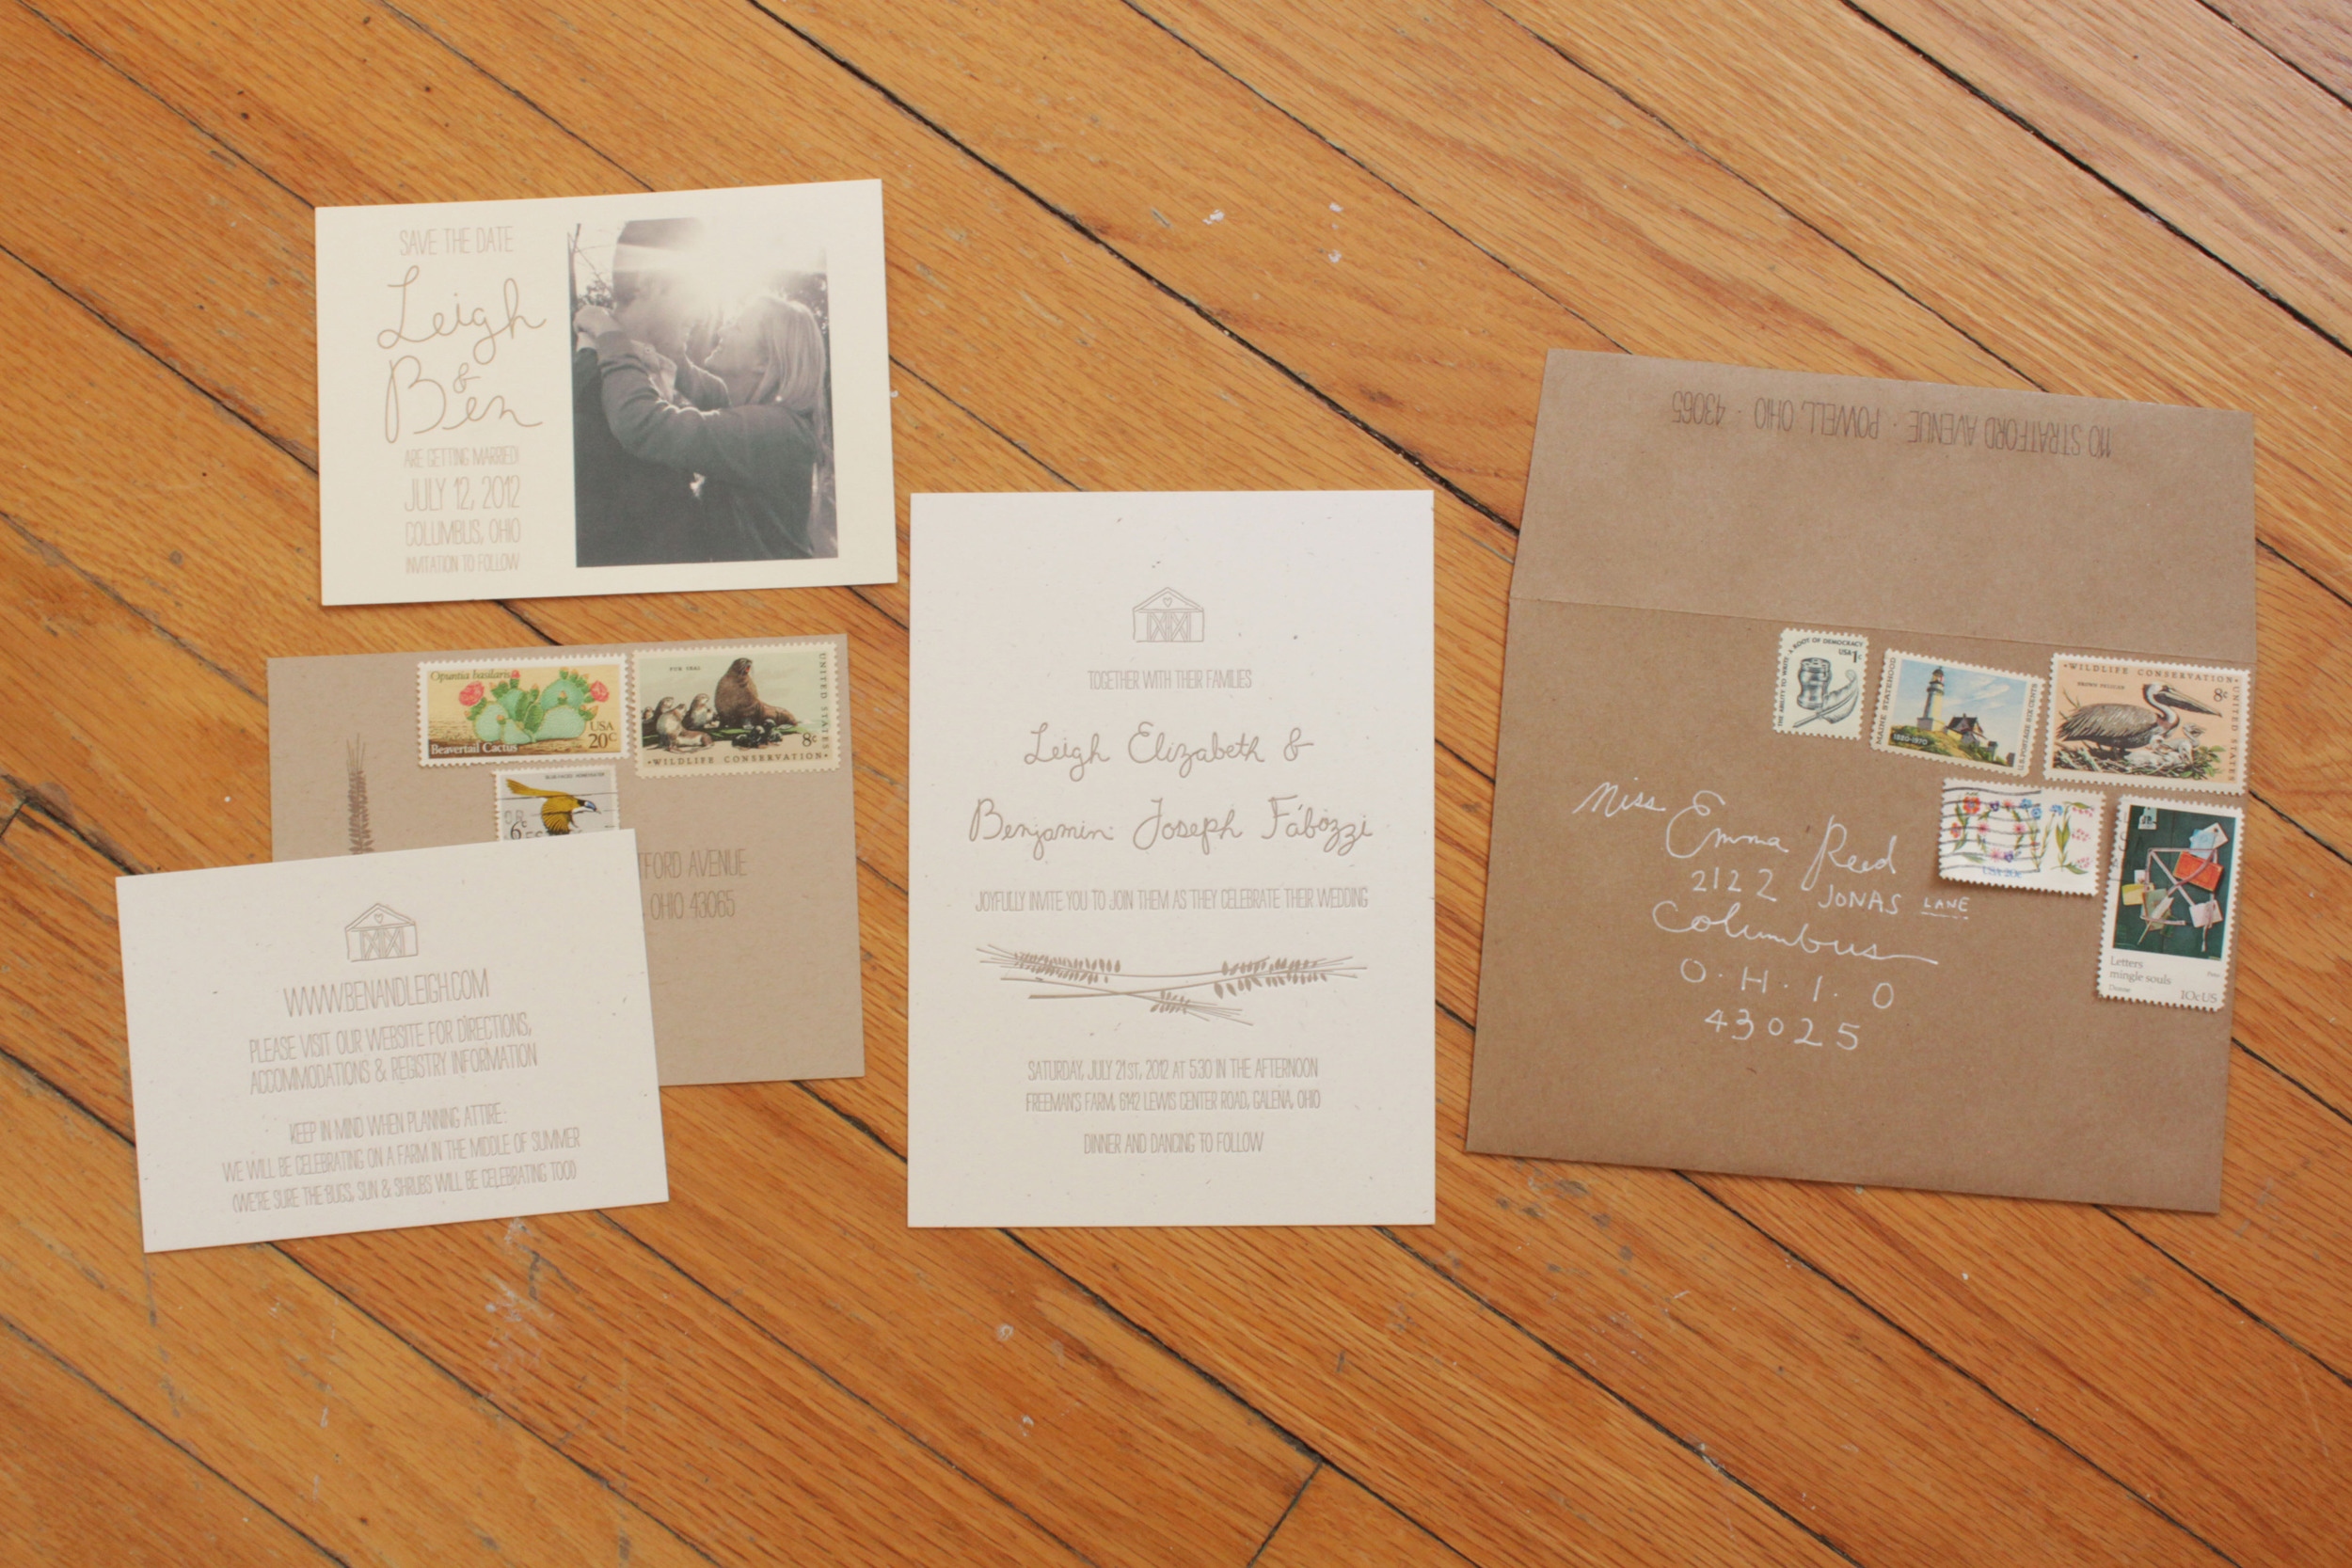  Image of a wedding invitation suite featuring a save the date card, invite card, and RSVP card 